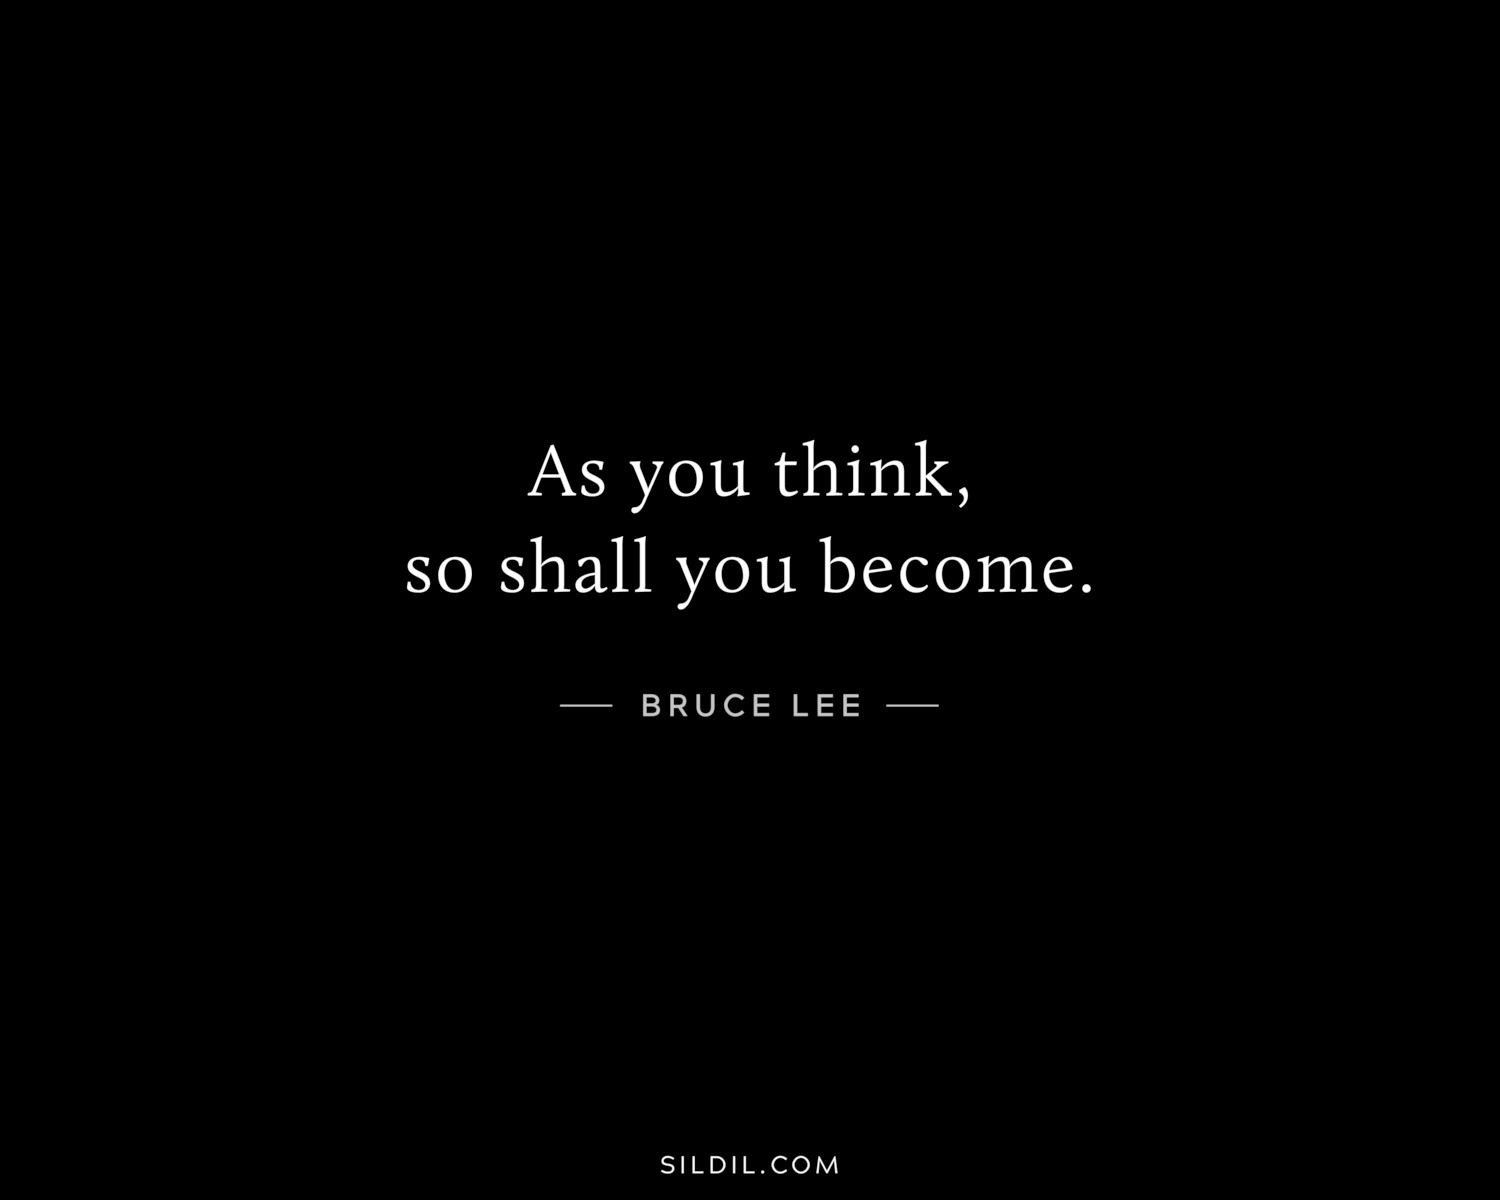 As you think, so shall you become.